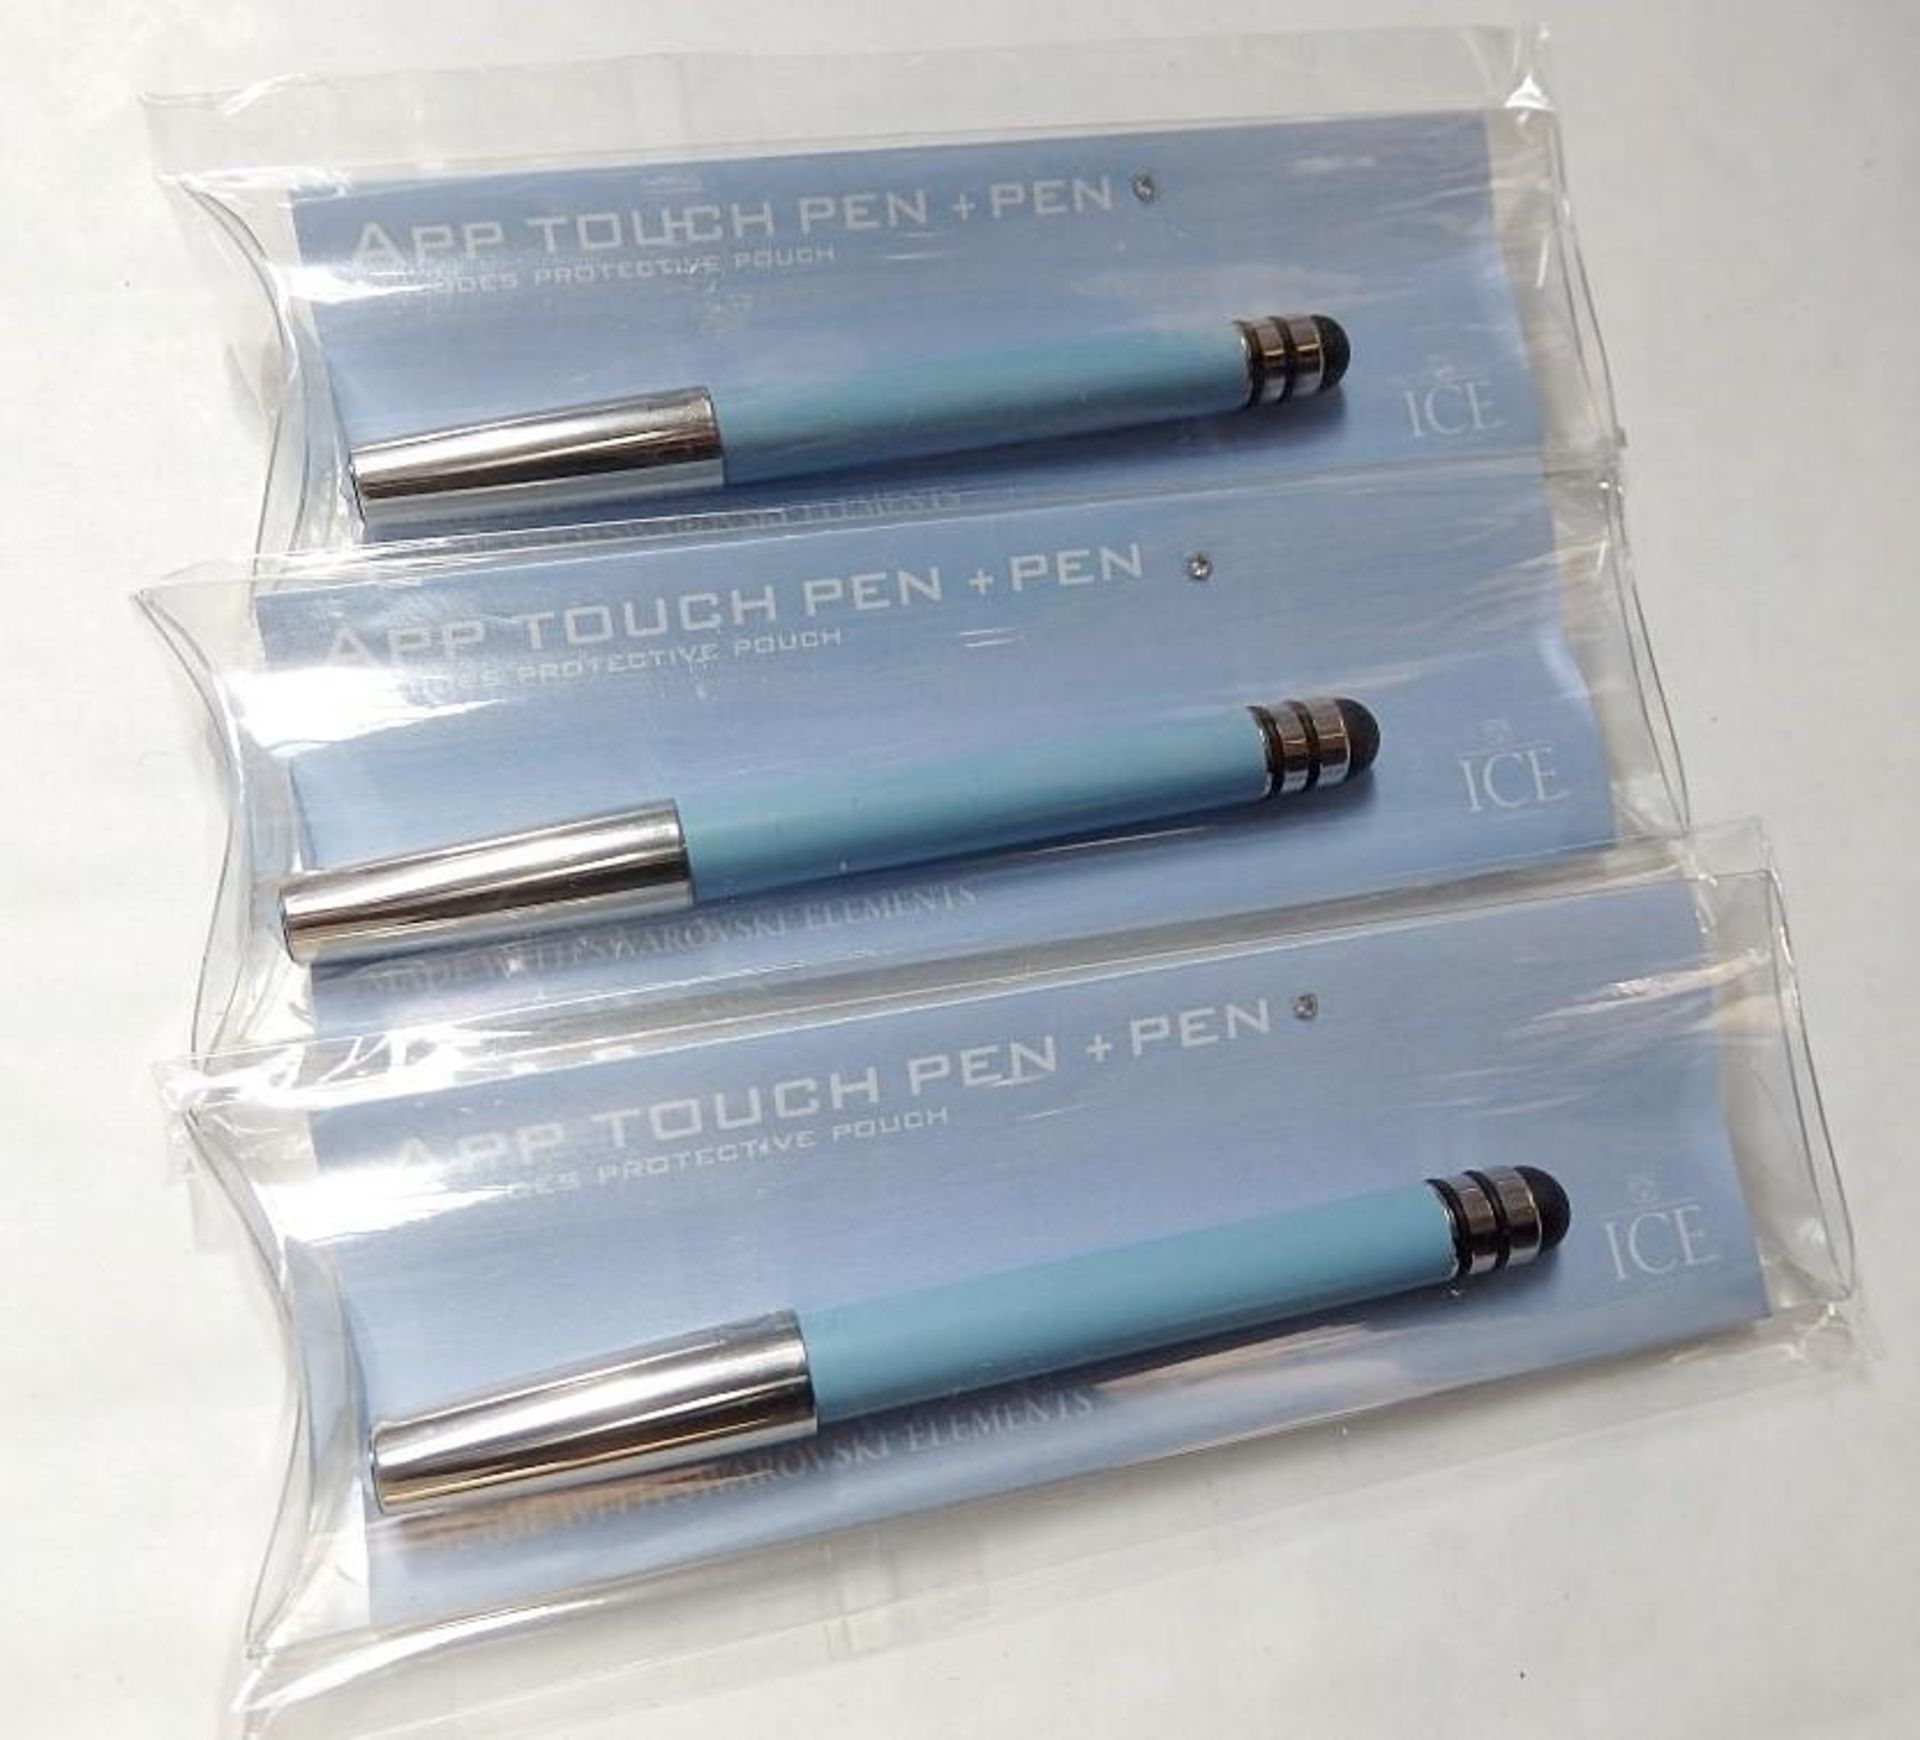 50 x ICE LONDON App Pen Duo - Touch Stylus And Ink Pen Combined - Colour: LIGHT BLUE - MADE WITH SW - Image 5 of 5